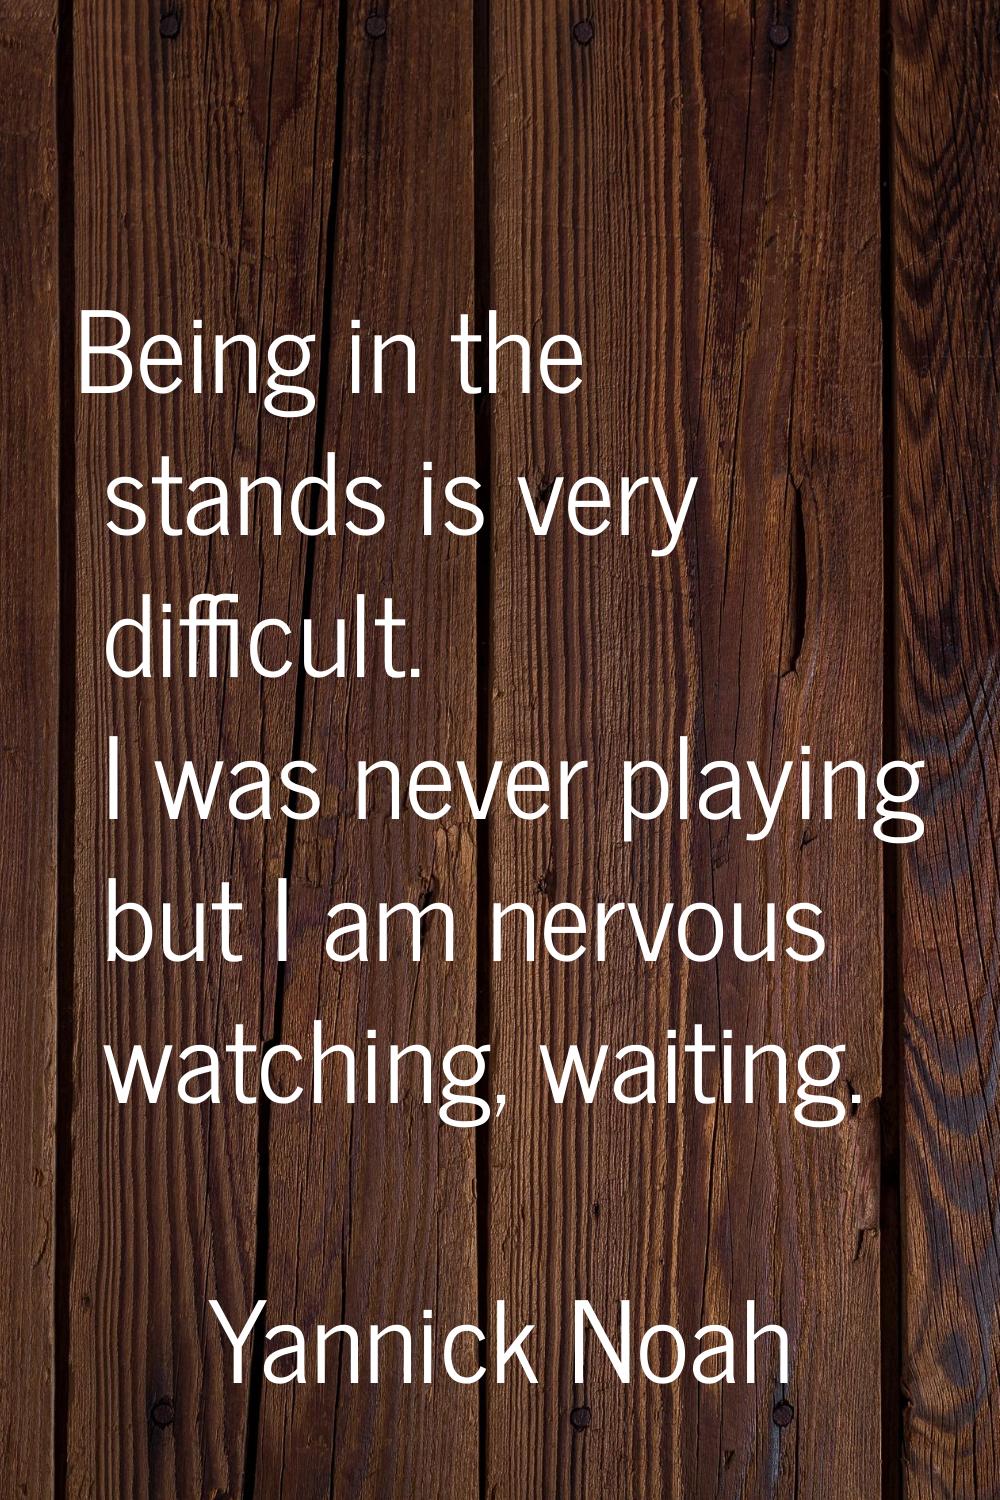 Being in the stands is very difficult. I was never playing but I am nervous watching, waiting.